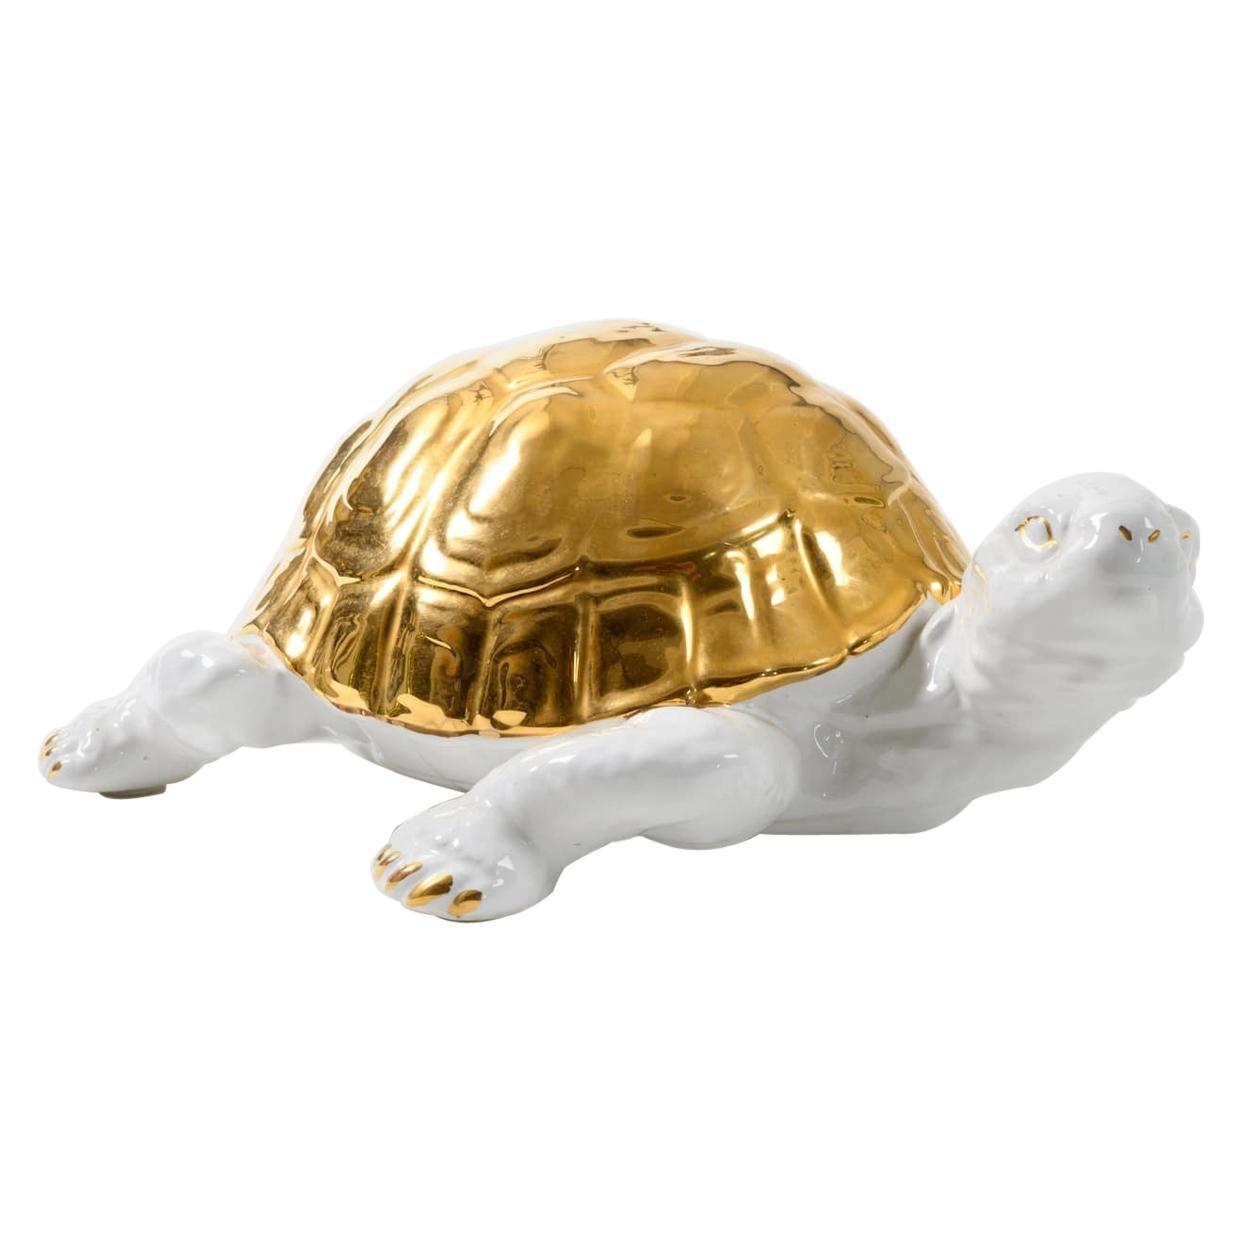 Ceramic Tortoise with Gold Detailing by Ronzan